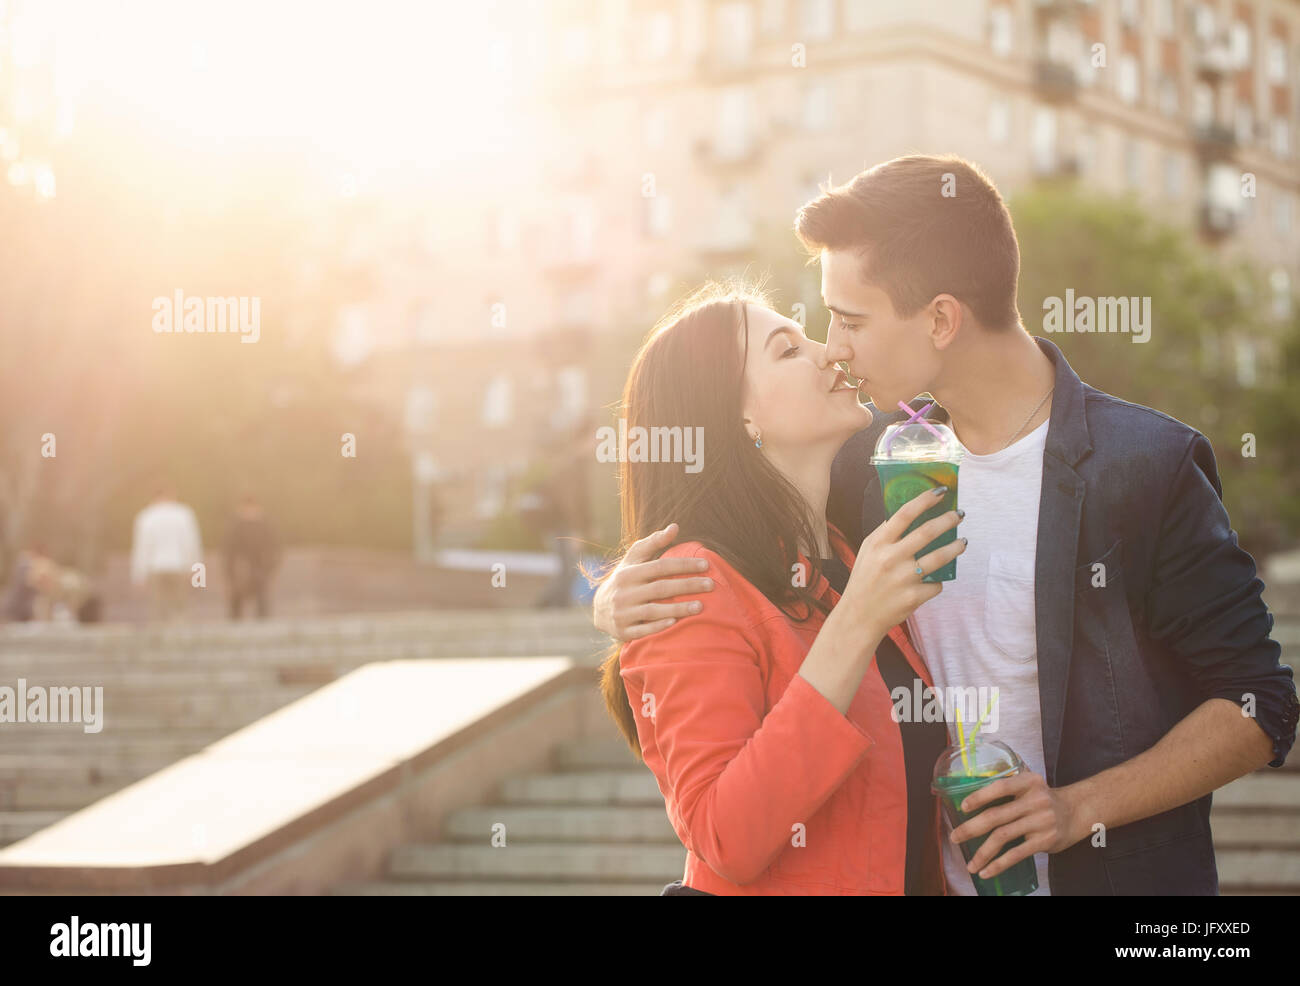 Teenagers drink fruit fresh from glasses. They are kissing. A couple in love on a date. Romance of first love. Stock Photo